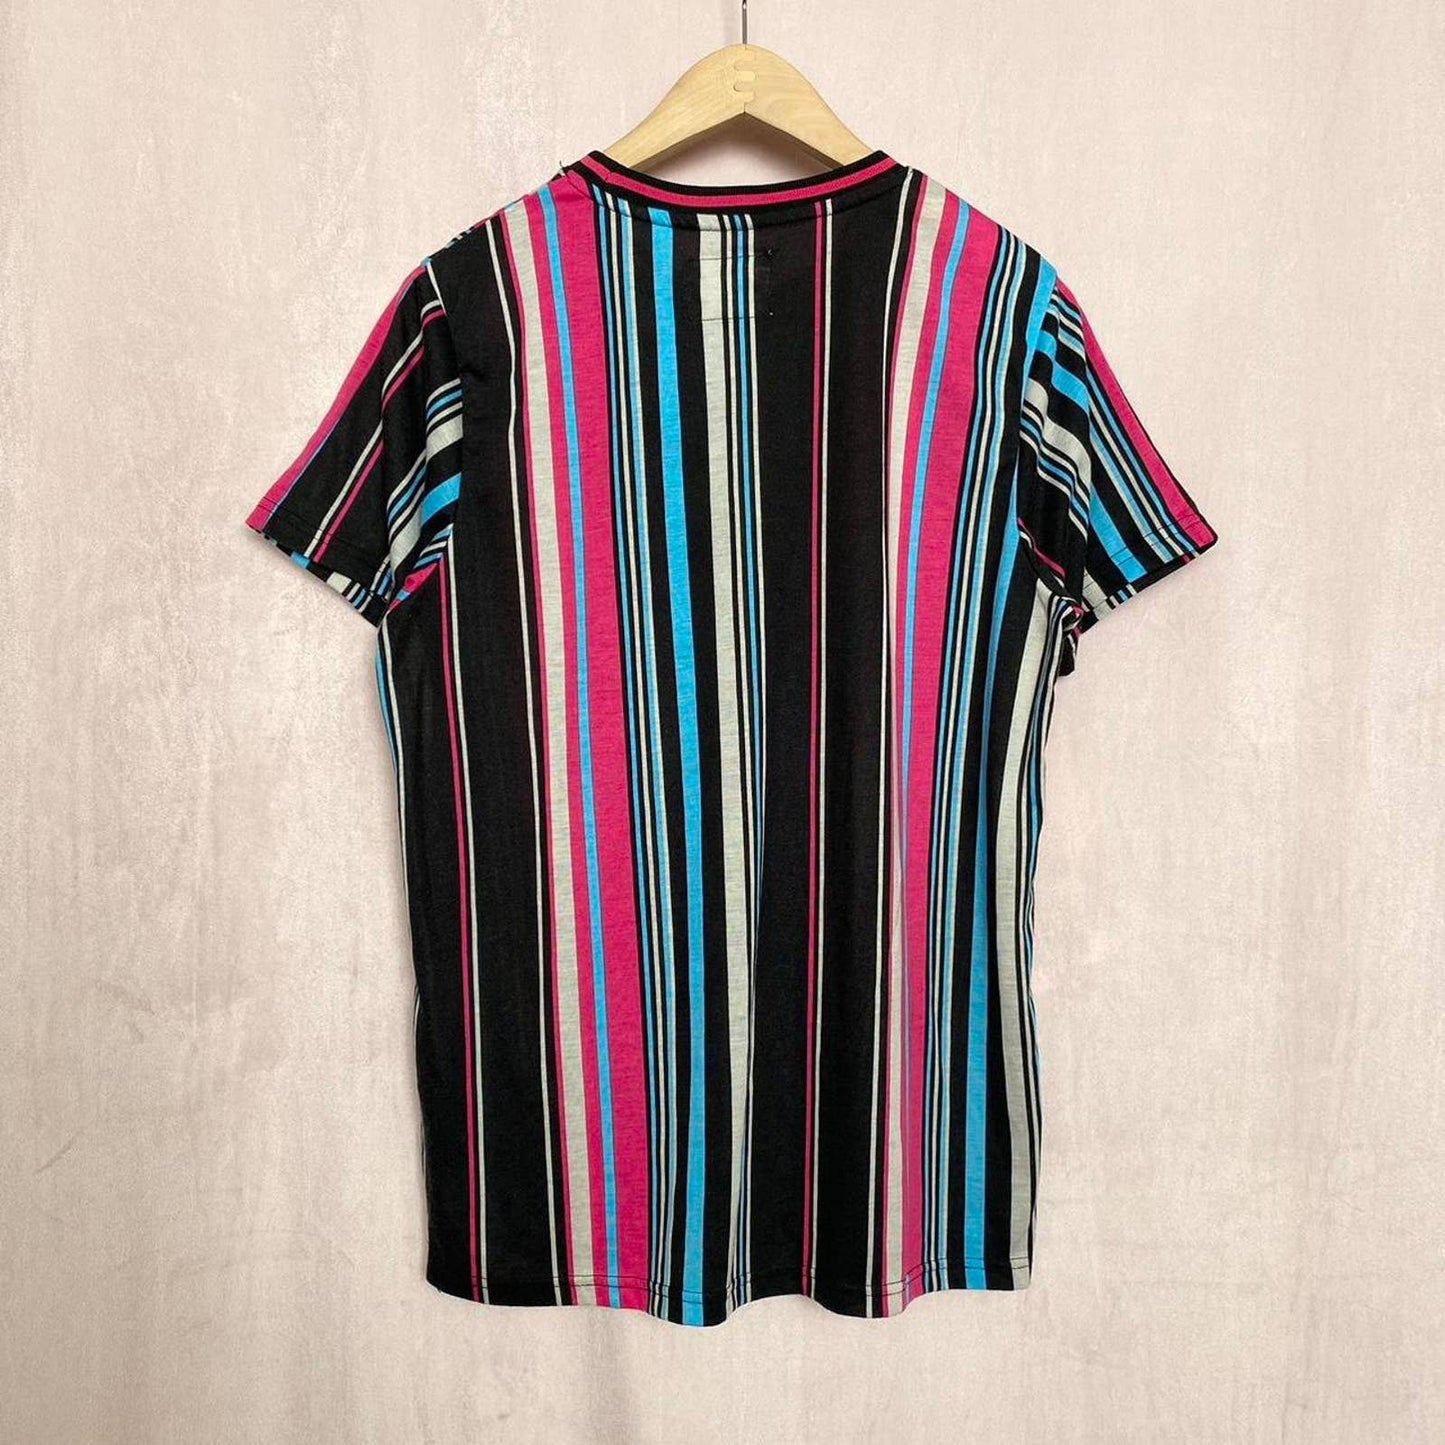 Secondhand Fresh Prints of Bel-Air Colorful Striped Tee, Size Medium